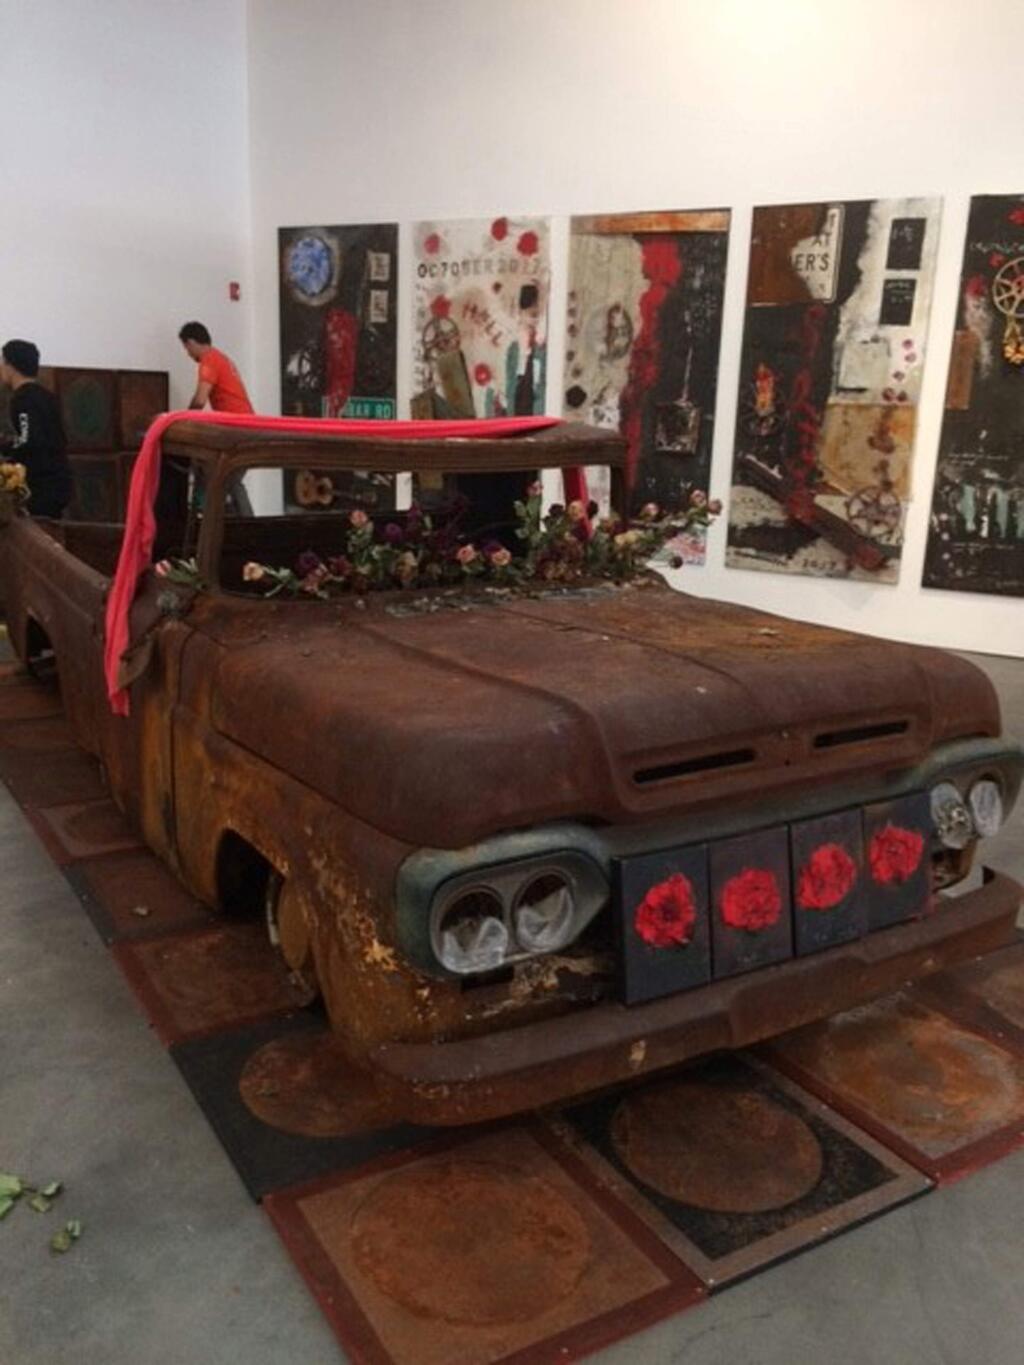 A mixed-media installation of a burned truck adorned with flowers by Adam Shaw is called “Beauty Born in Flames.” (Museums of Sonoma County)